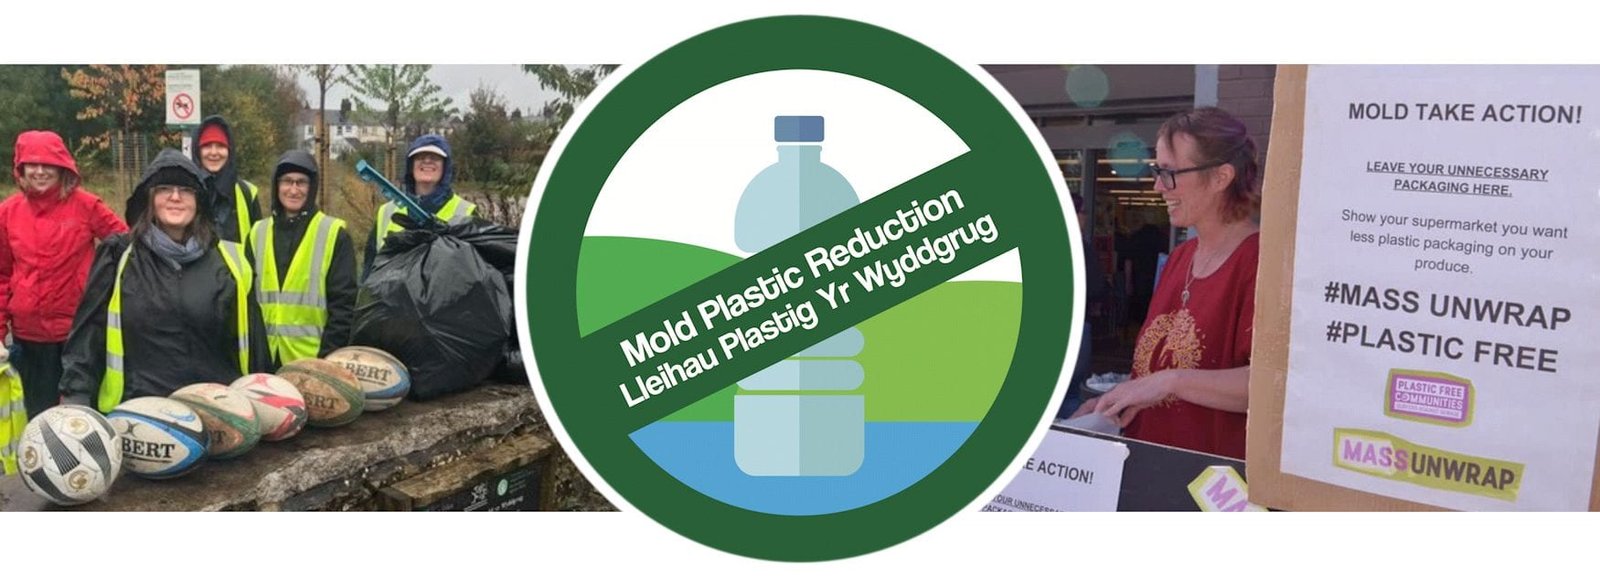 Header image for Mold Plastic Reduction News and Events page showing litter pickers and plastic mass unwrap